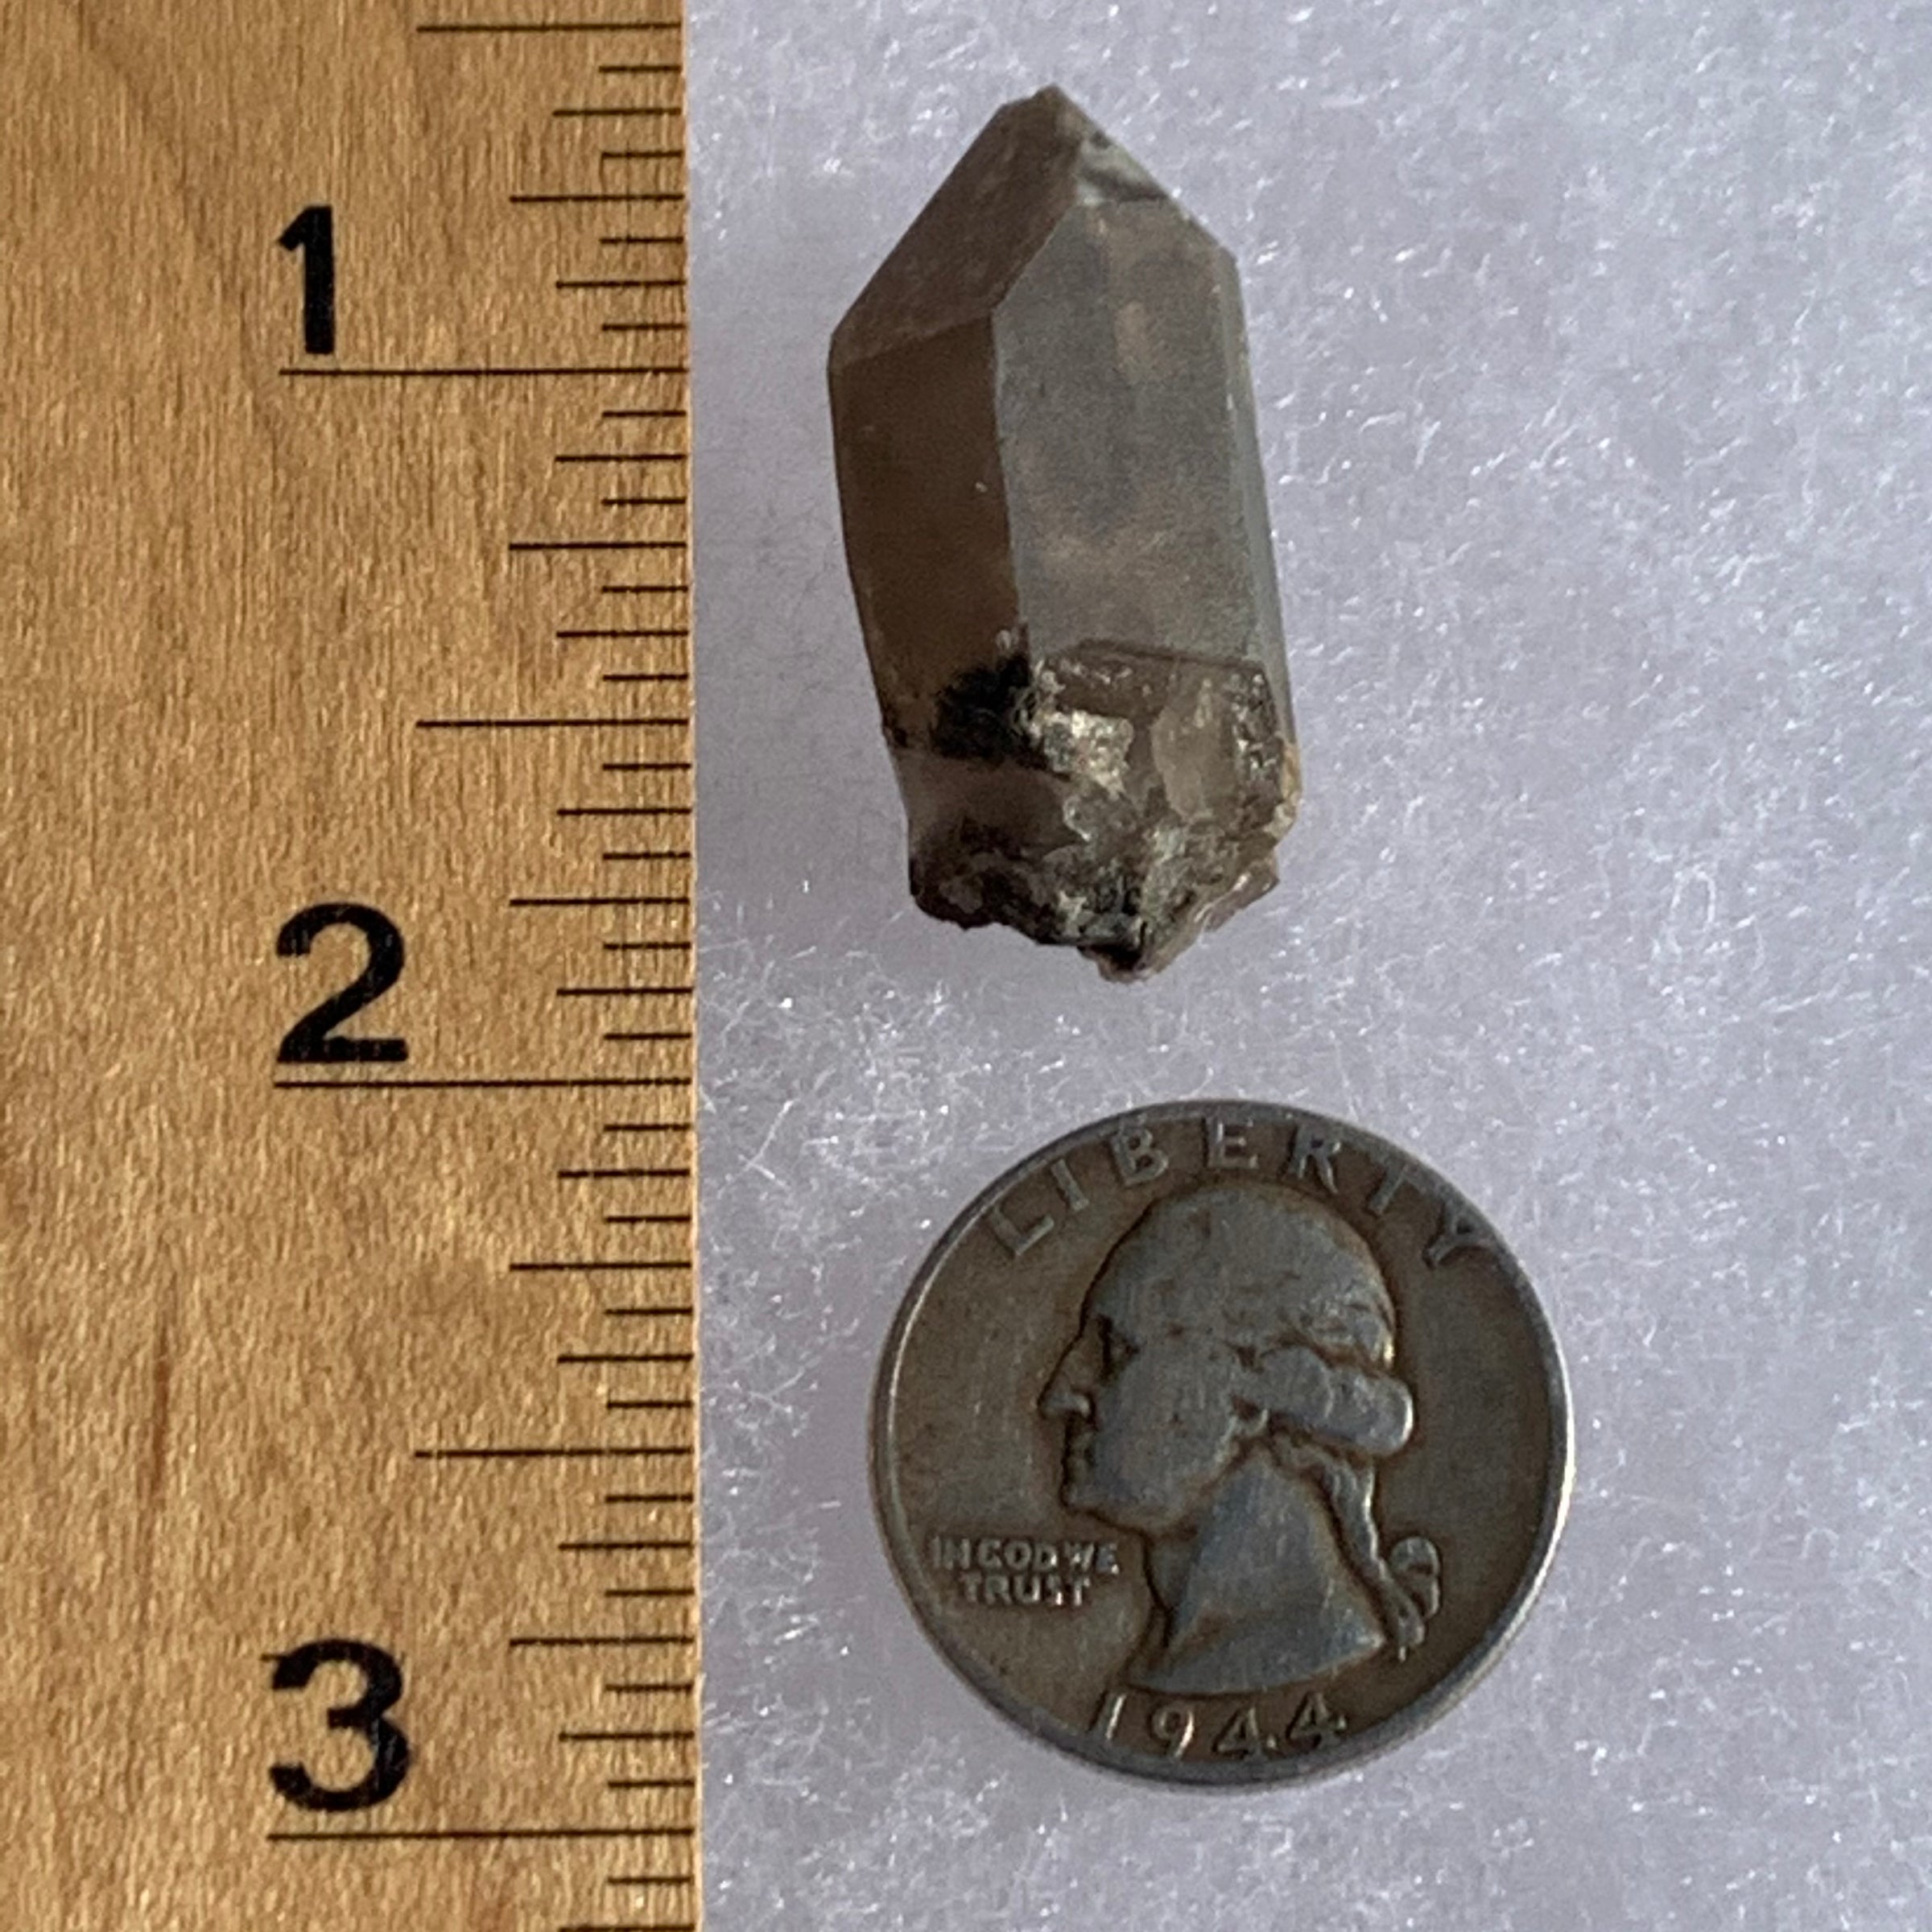 tiny brookite crystals on a terminated smokey quartz crystal next to a ruler and a quarter for scale